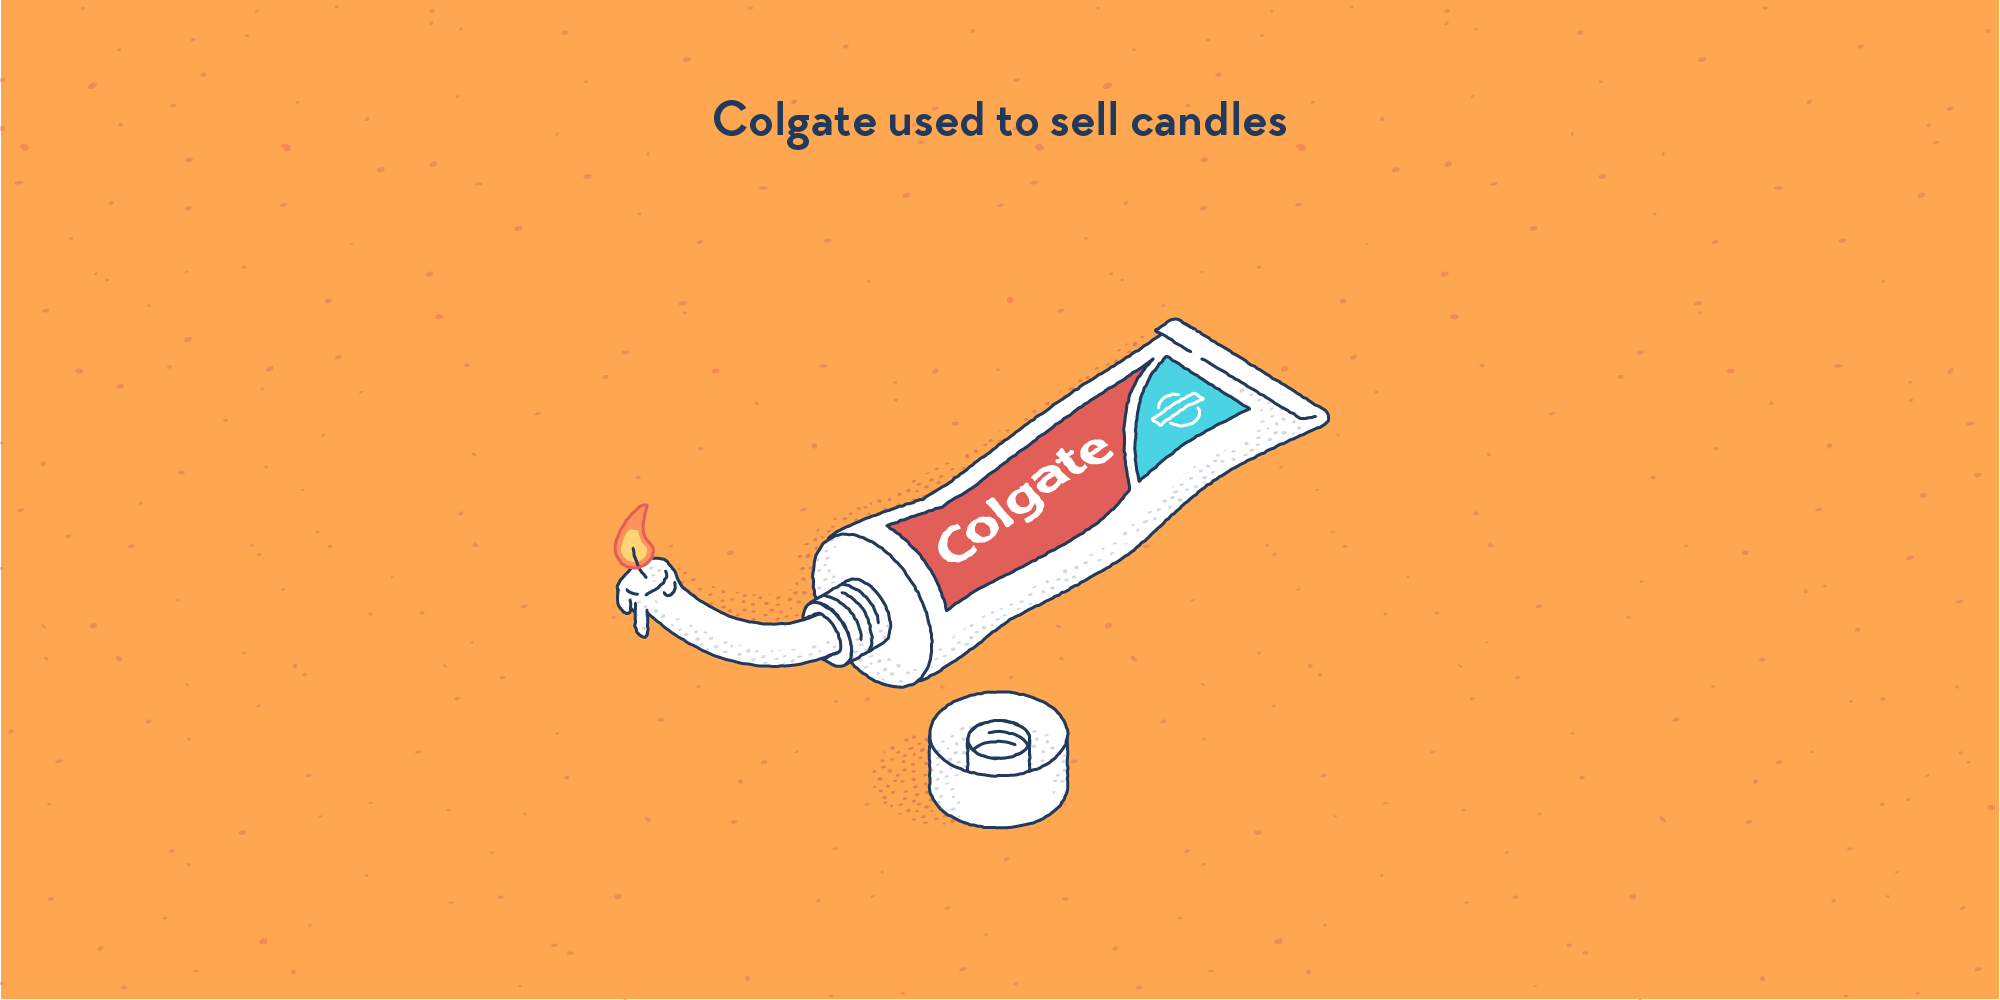 A modern tube of Colgate toothpaste, from the hole of which is pressed out a candle in lieu of toothpaste.